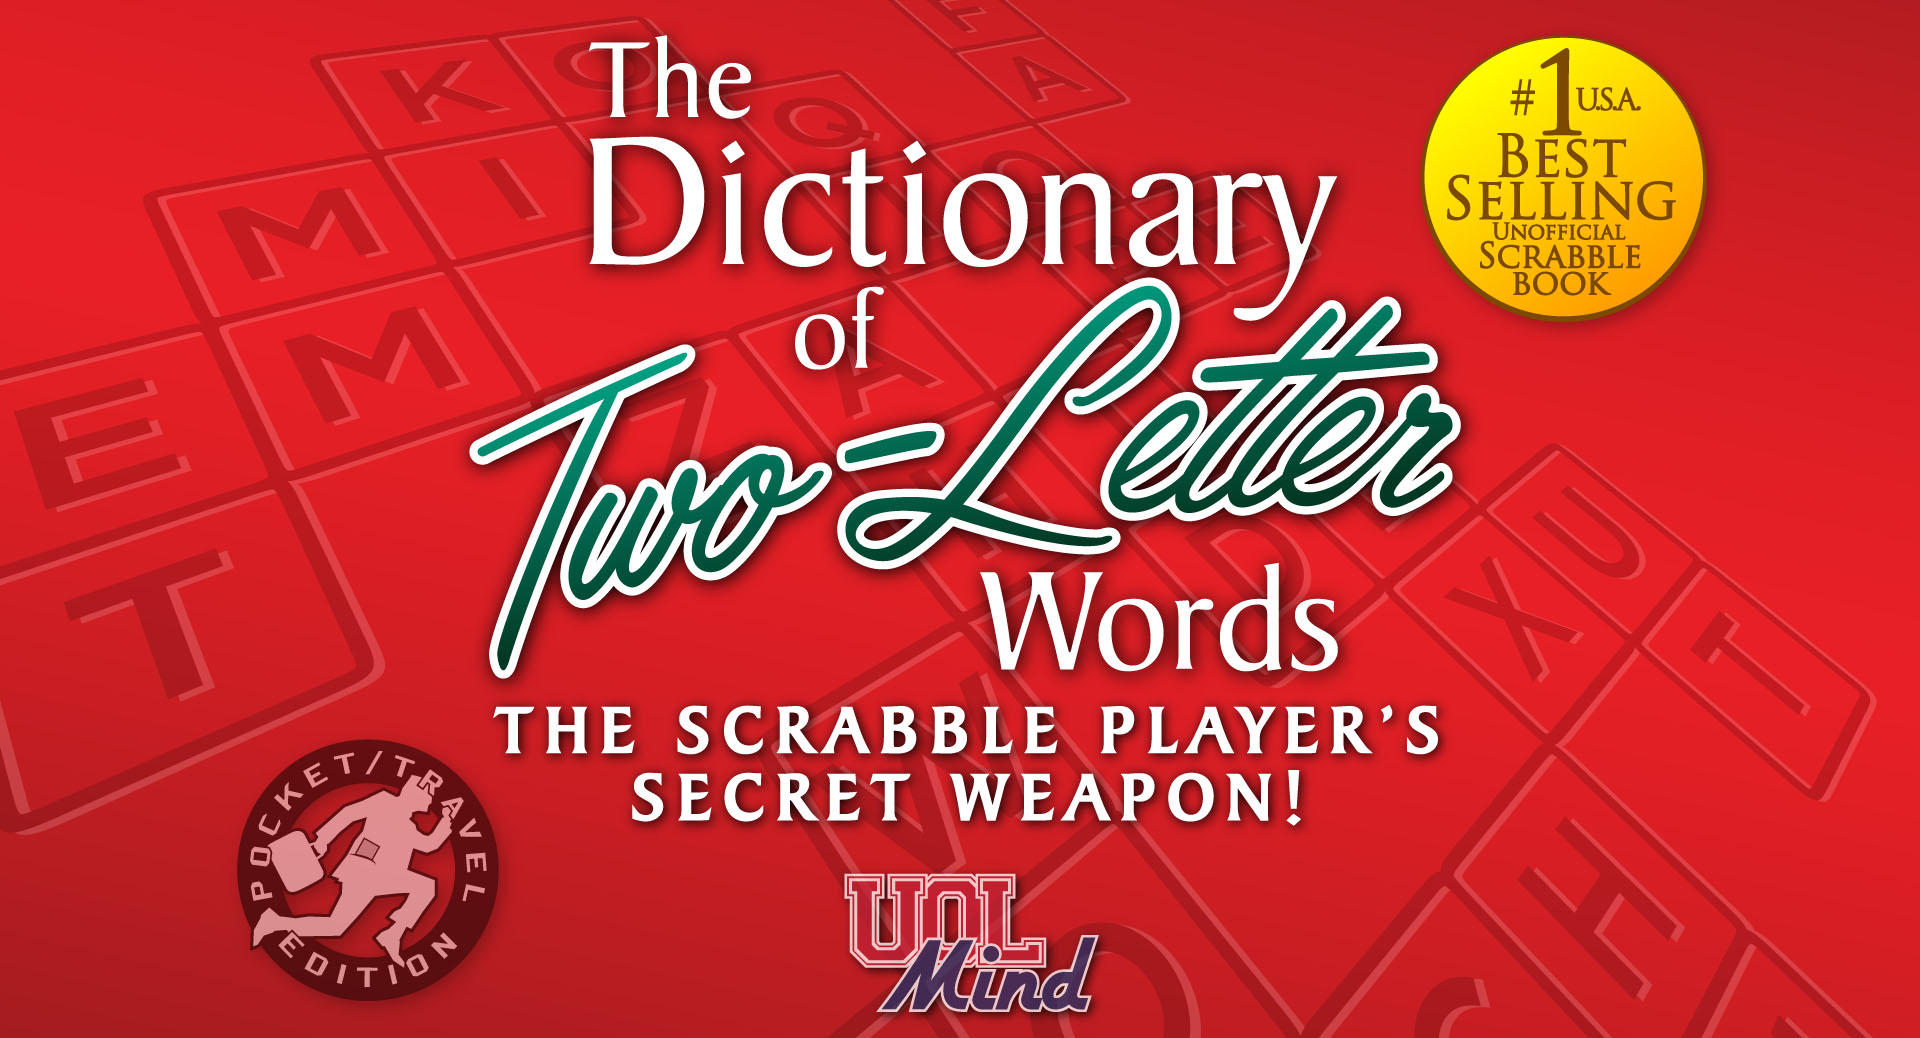 Uol Mind: The Dictionary of Two-Letter Words - The Scrabble